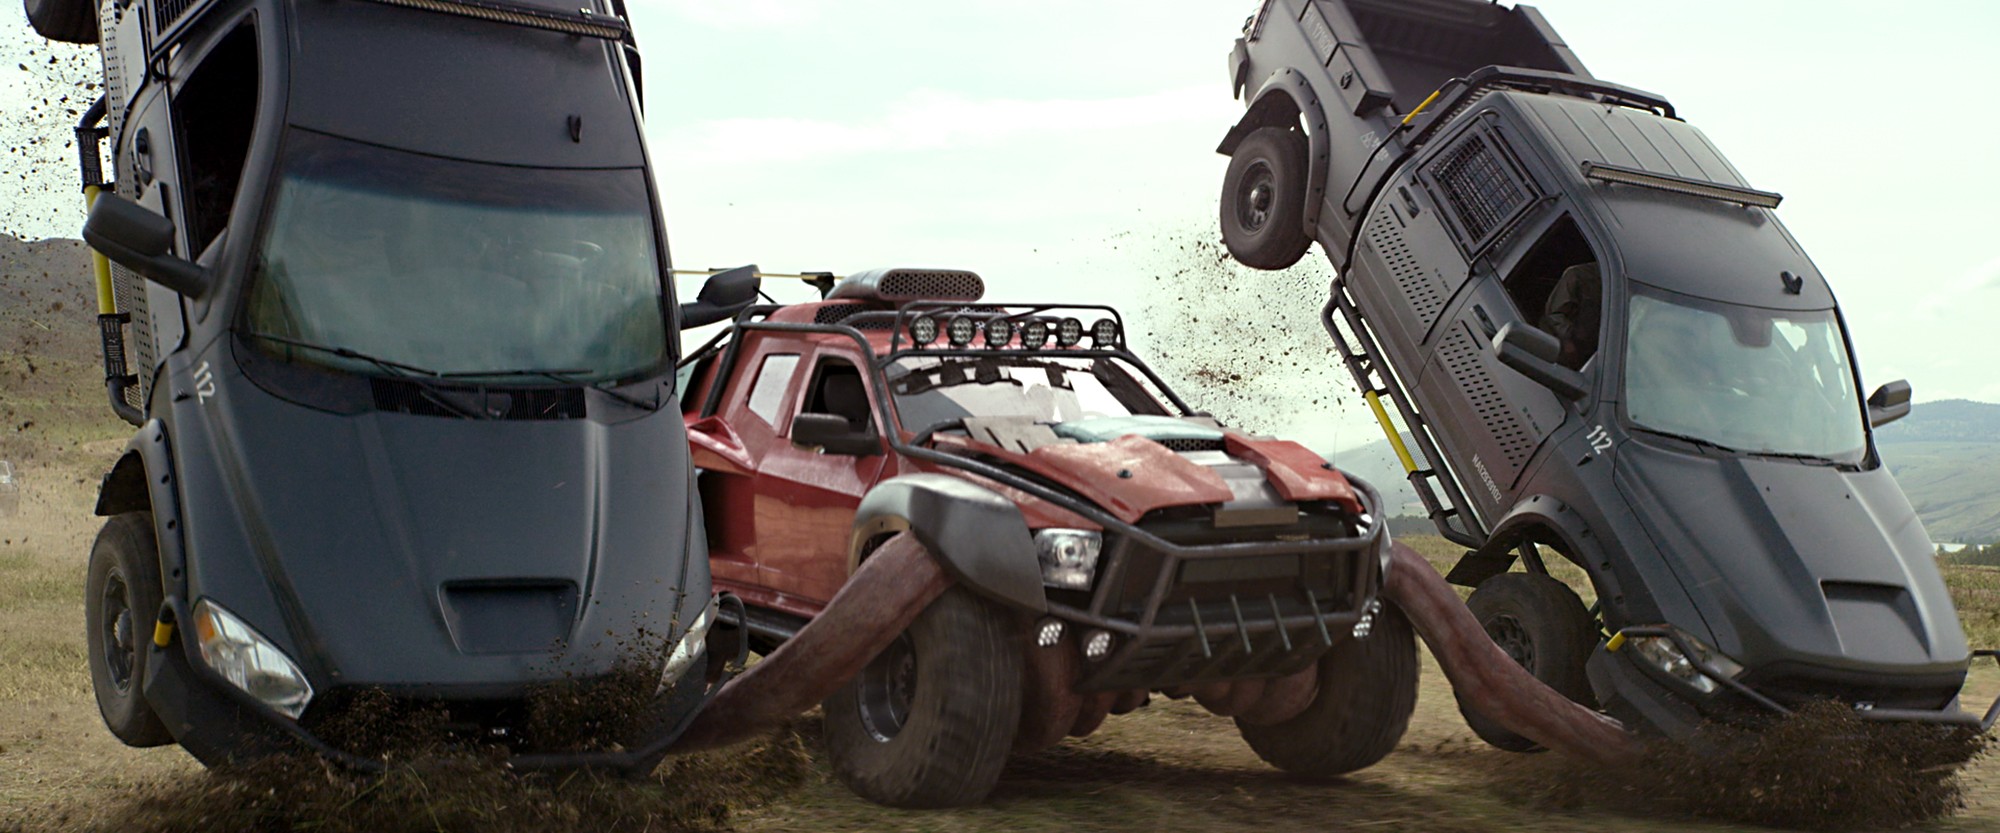 MONSTER TRUCKS is in theaters NOW!! #MonsterTrucks - Mom Does Reviews